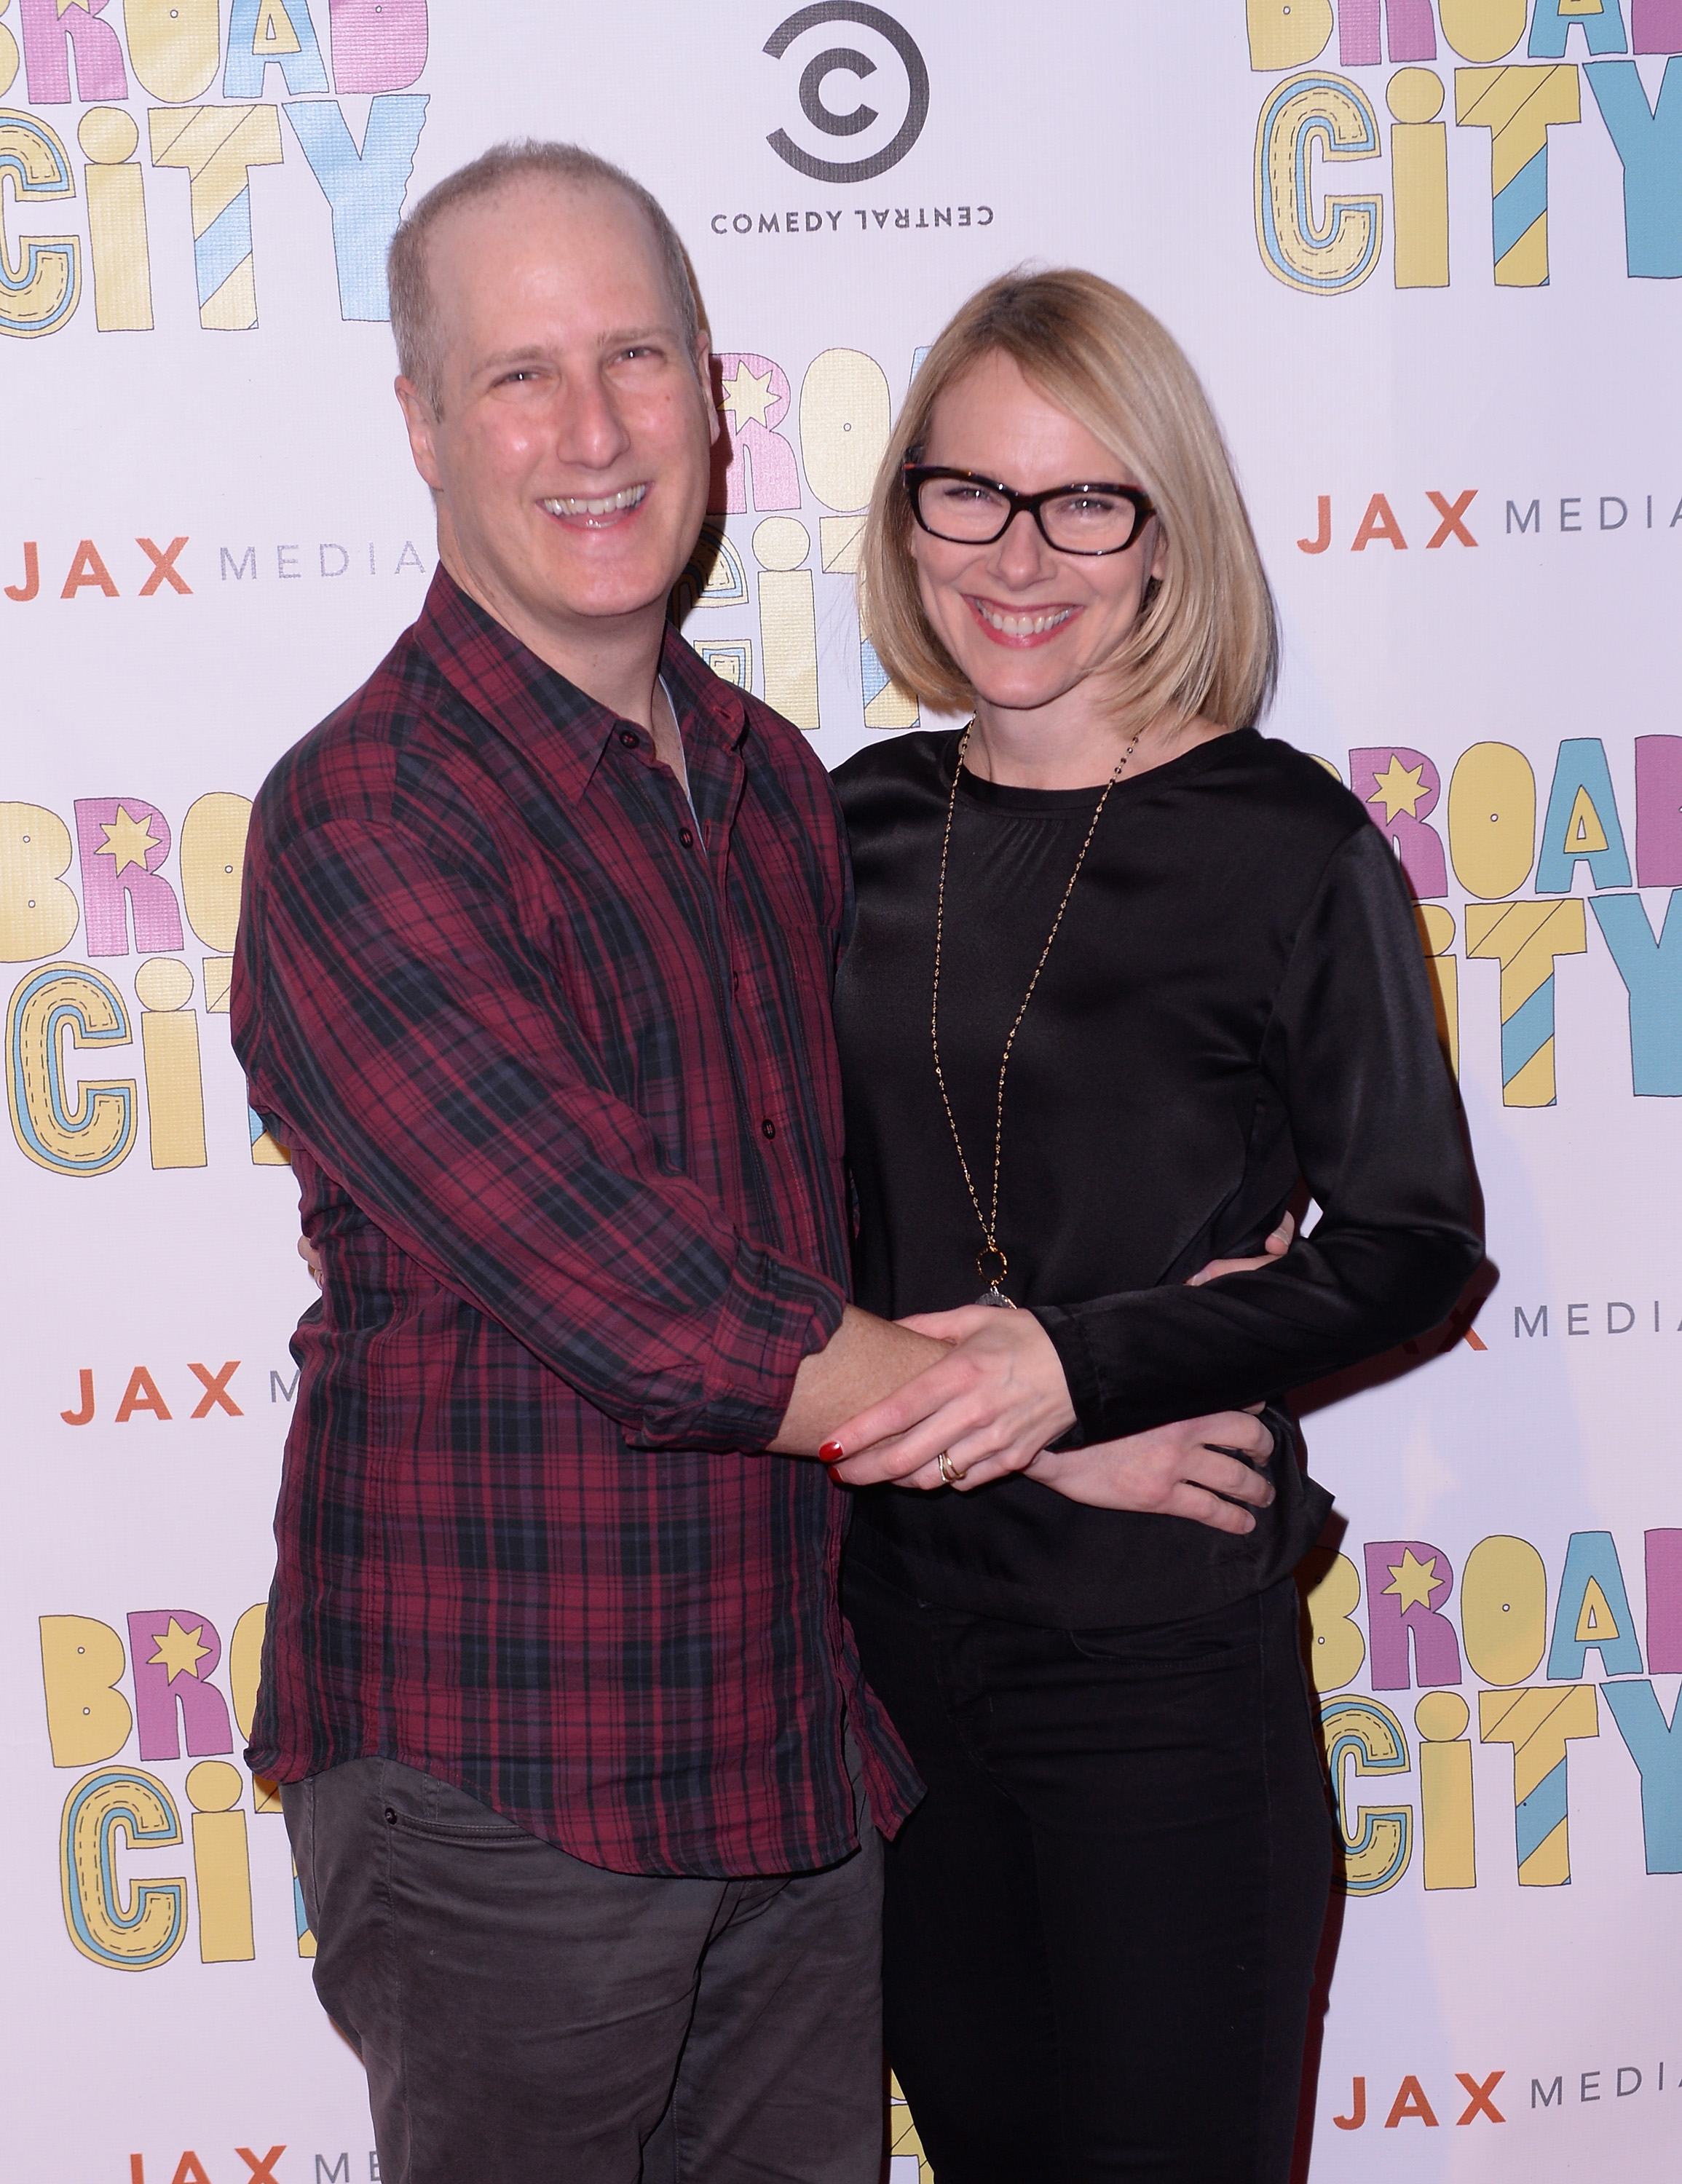 Eric Slovin and Amy Ryan at the season 2 premiere party of "The Broad City" on January 7, 2015, in New York City. | Source: Getty Images